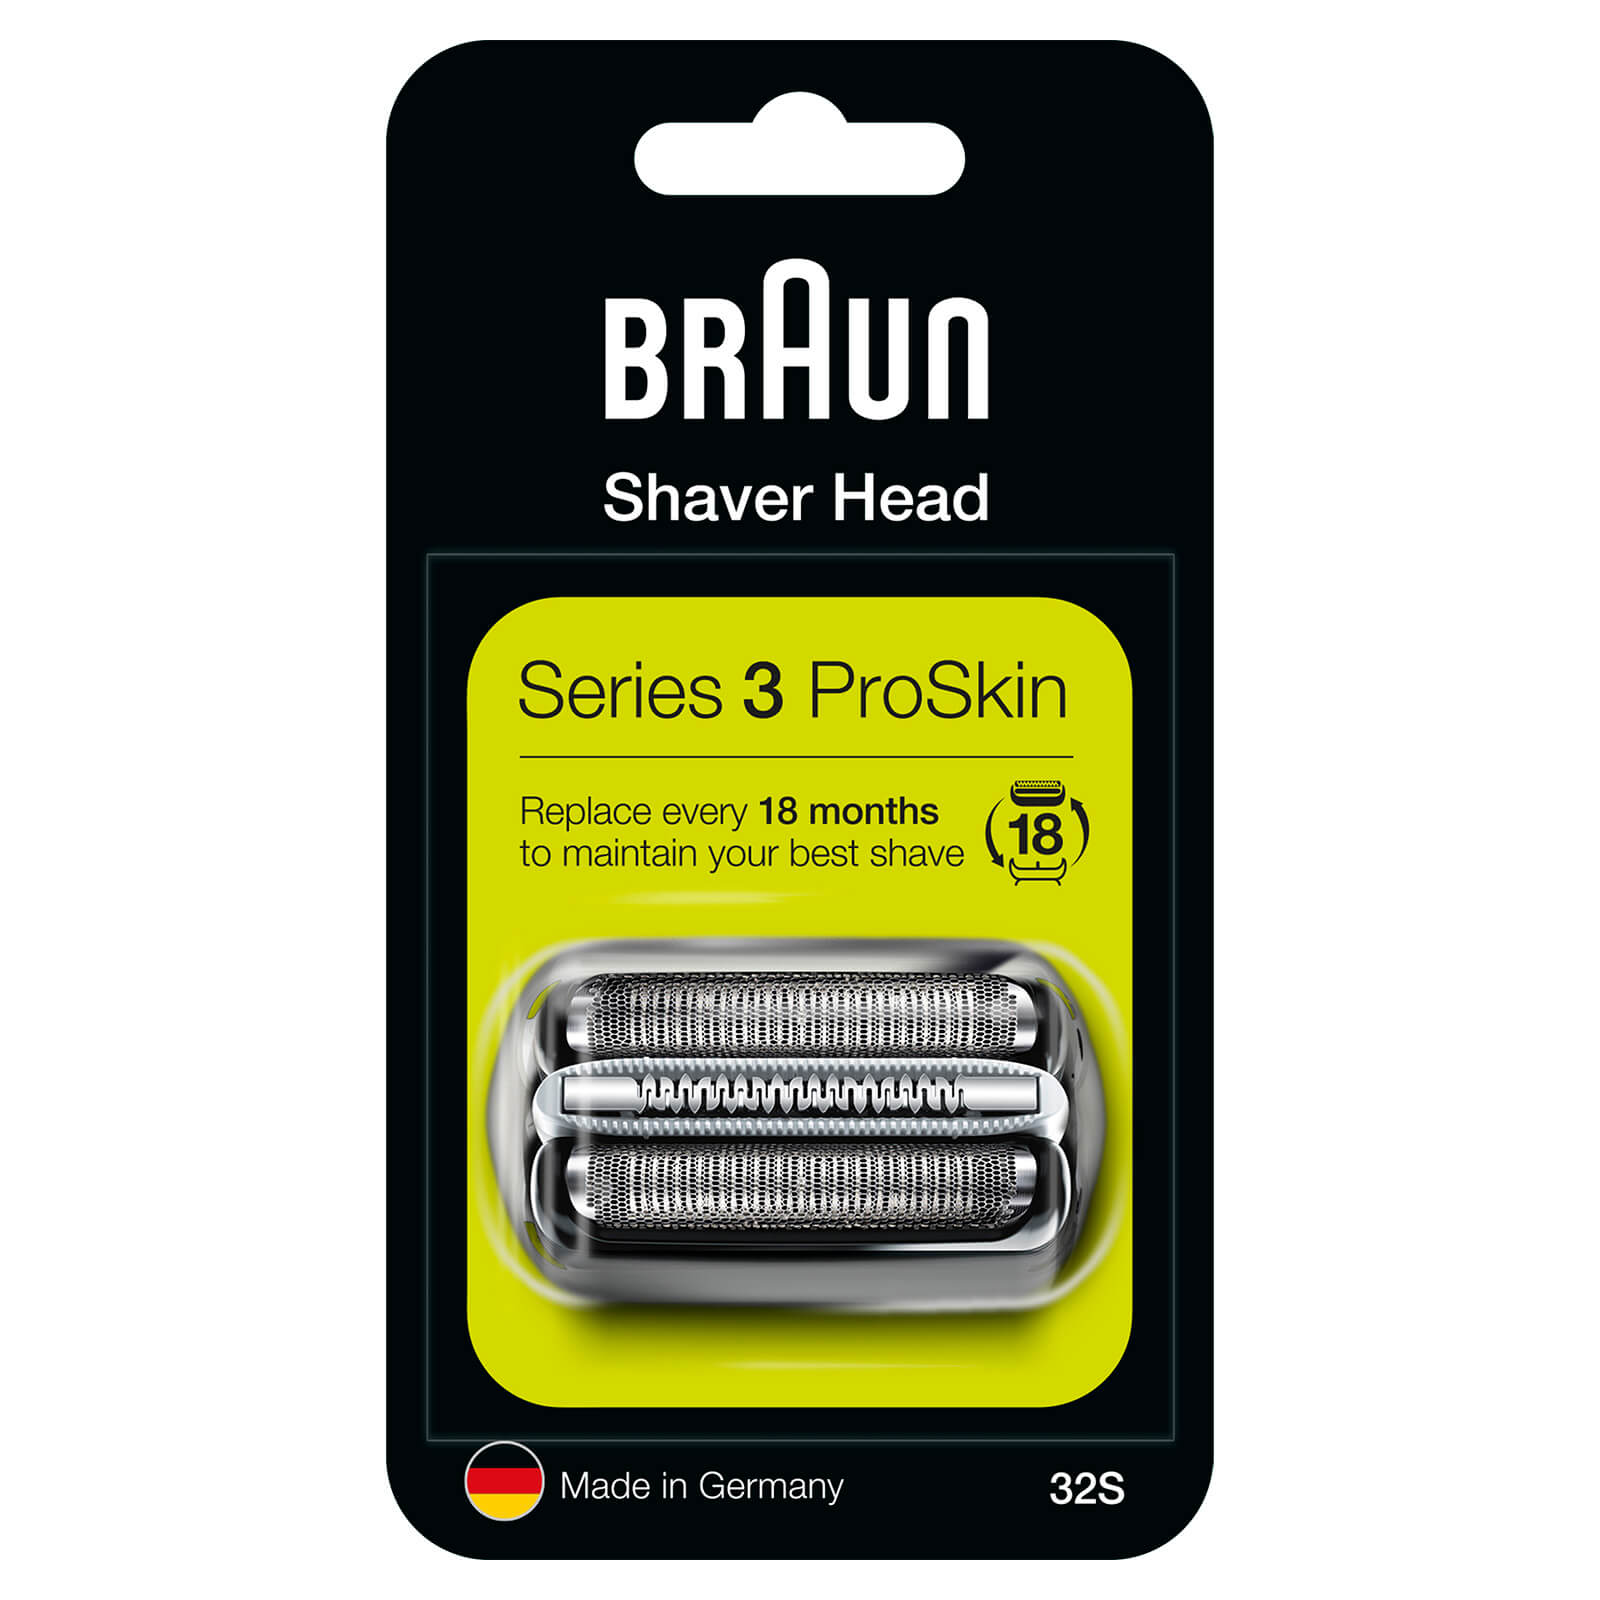 Braun Series 3 32S Electric Shaver Head Replacement - Silver